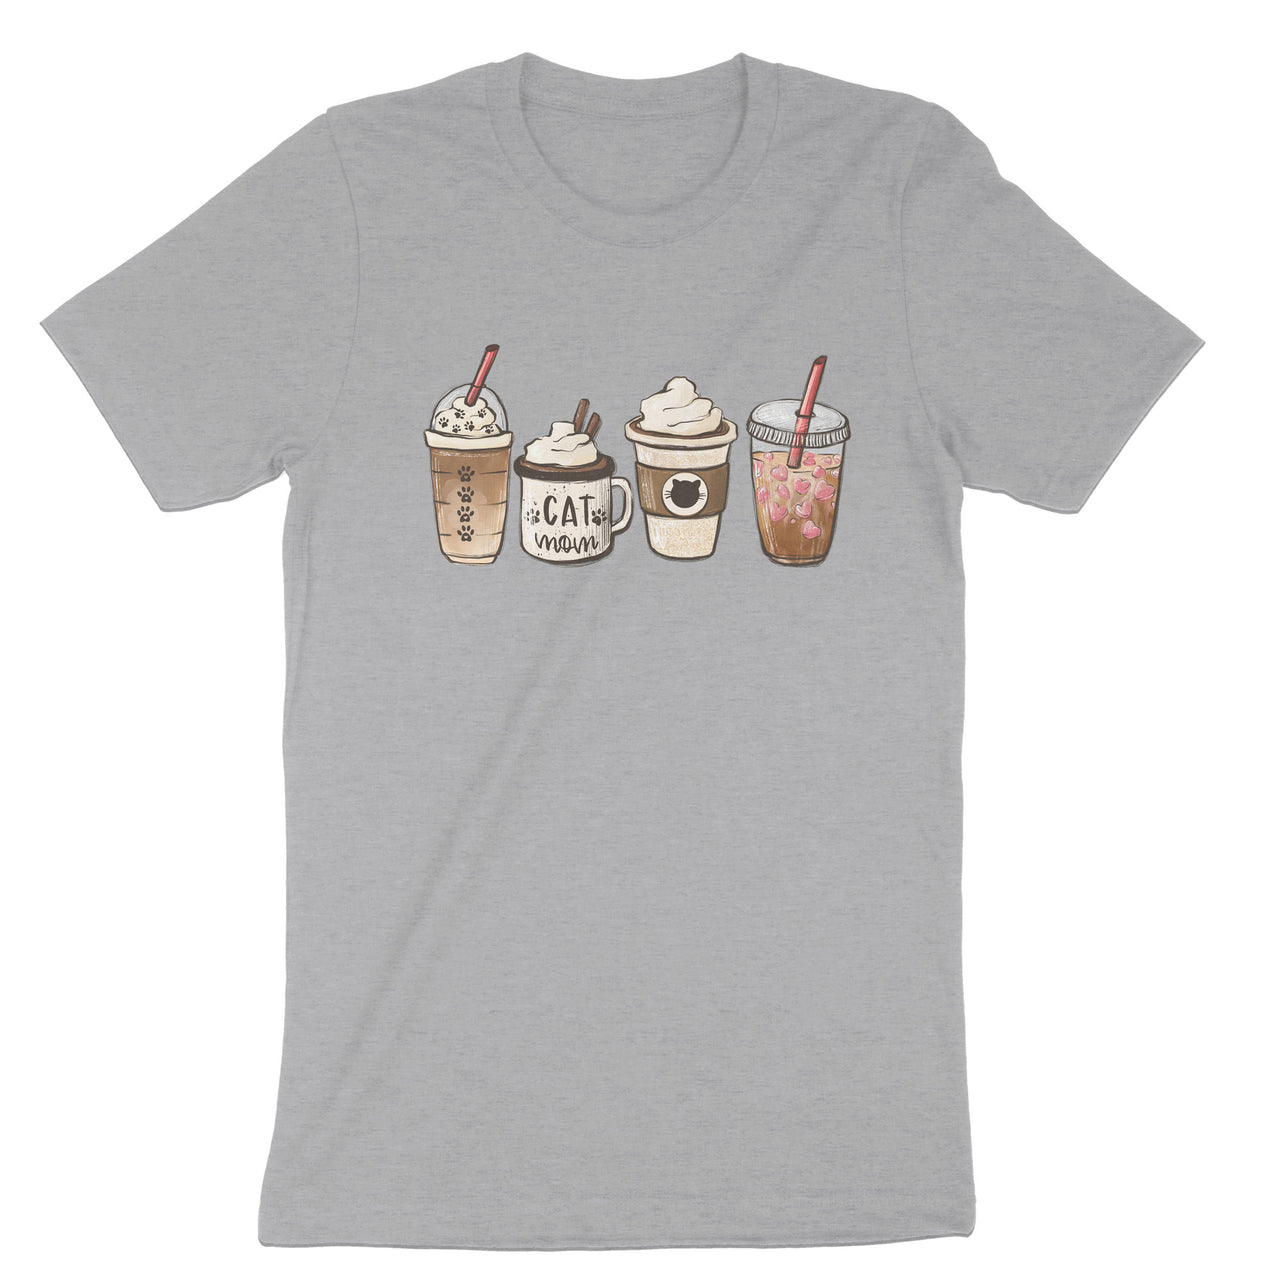 Coffee and Cats T-Shirt, Iced Coffee Latte Cat Lover Tee Shirt